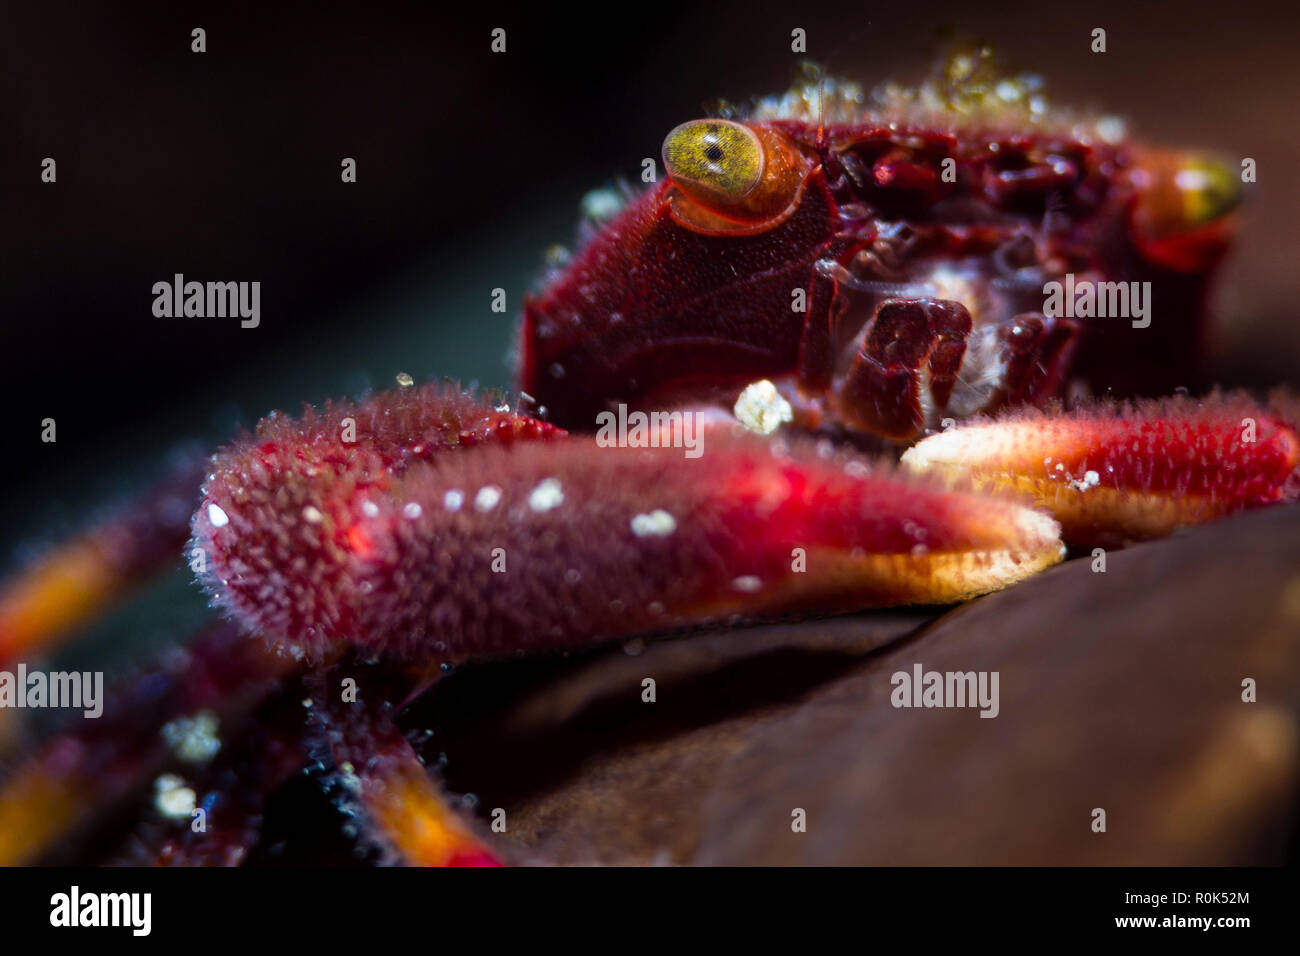 Close-up of a coral crab, Anilao, Philippines. Stock Photo